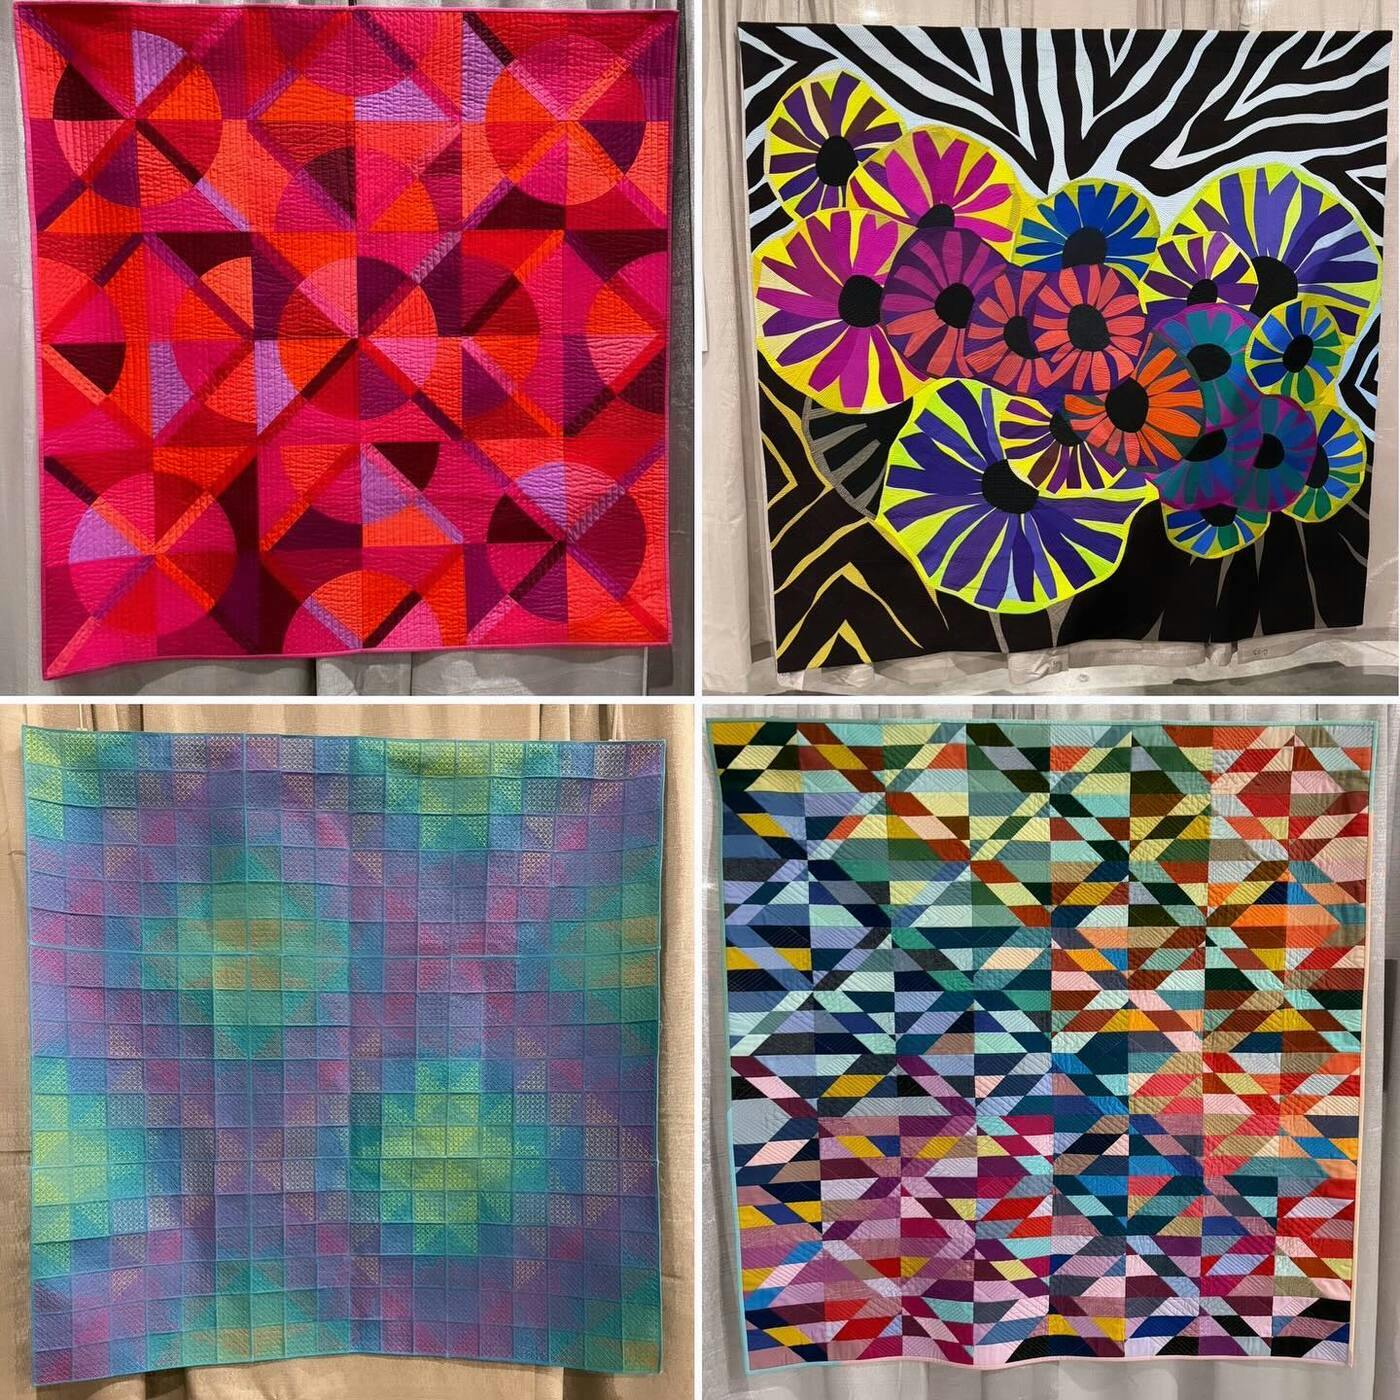 QuiltCon 2024